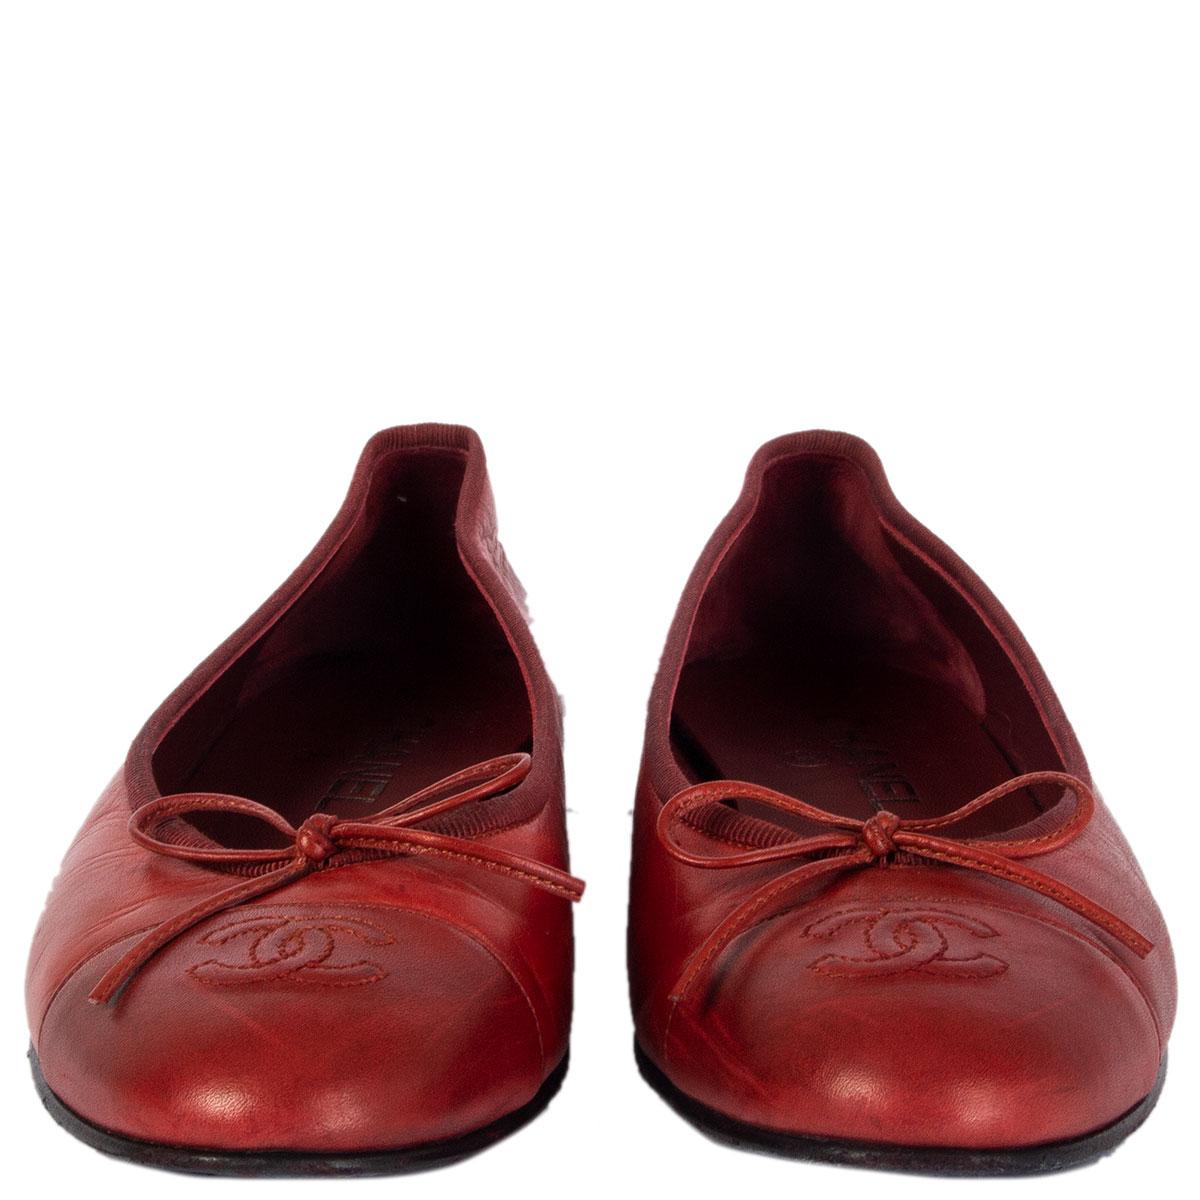 100% authentic Chanel classic ballet flats in brick red lambskin with faux patina. Have been worn and are in excellent condition.  

Imprinted Size	39
Shoe Size	39
Inside Sole	25.5cm (9.9in)
Width	8cm (3.1in)
Heel	1.5cm (0.6in)

All our listings